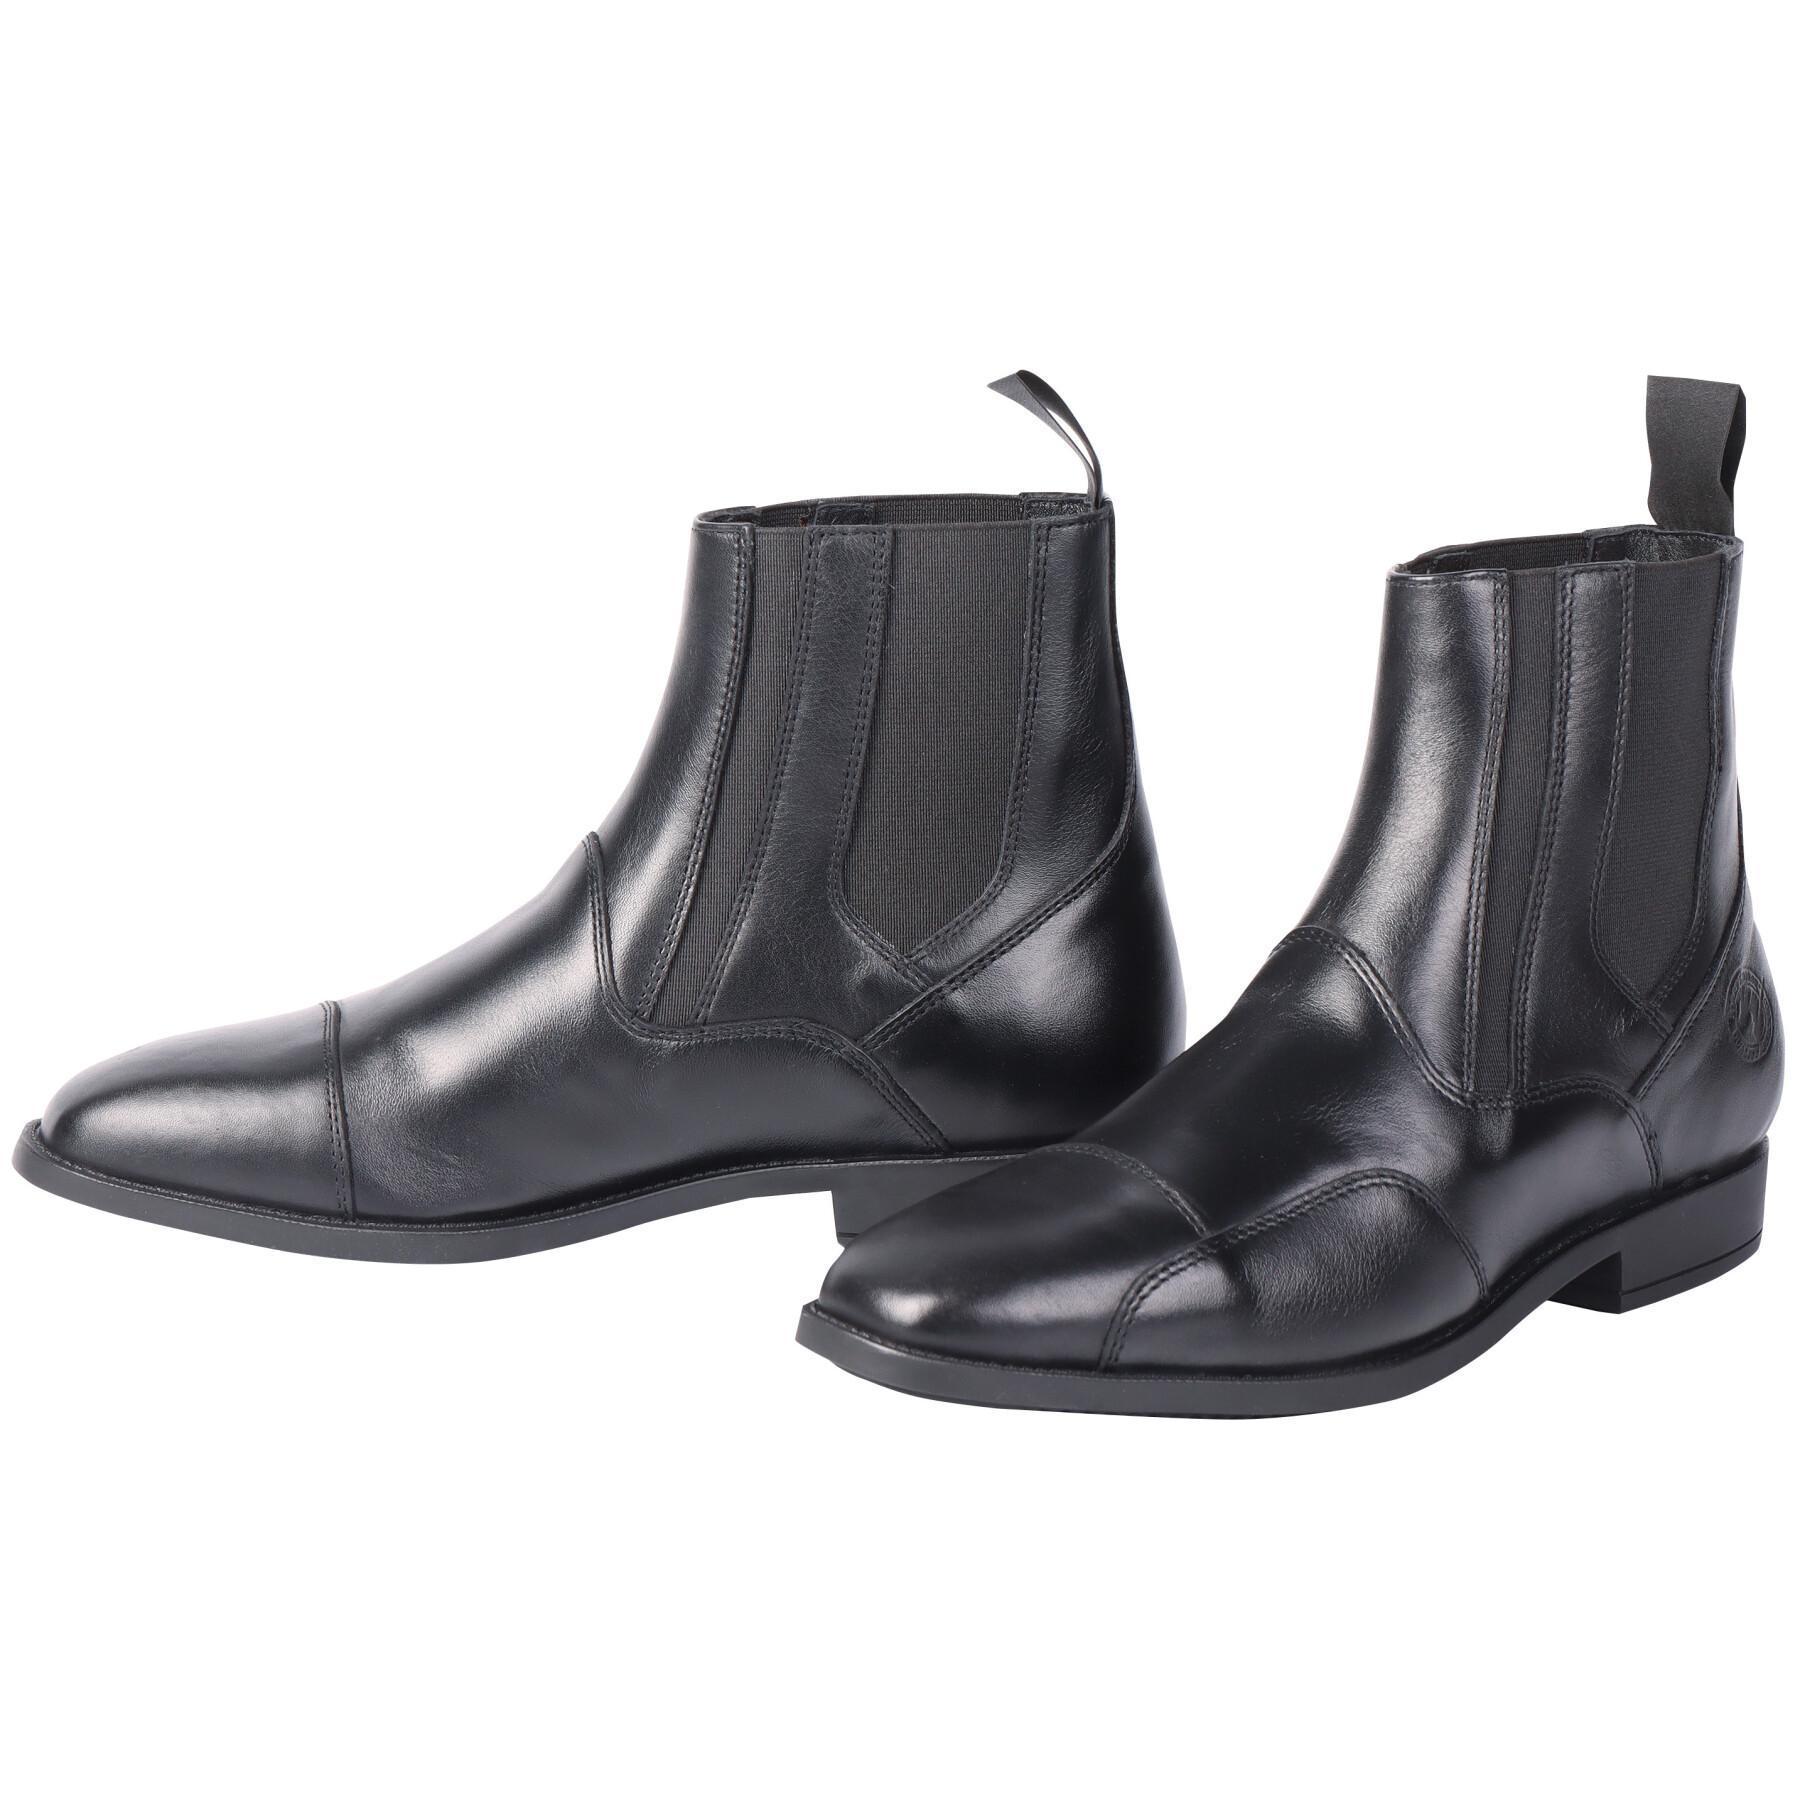 Boots leather riding shoes Harry's Horse Jodhpur Oxford